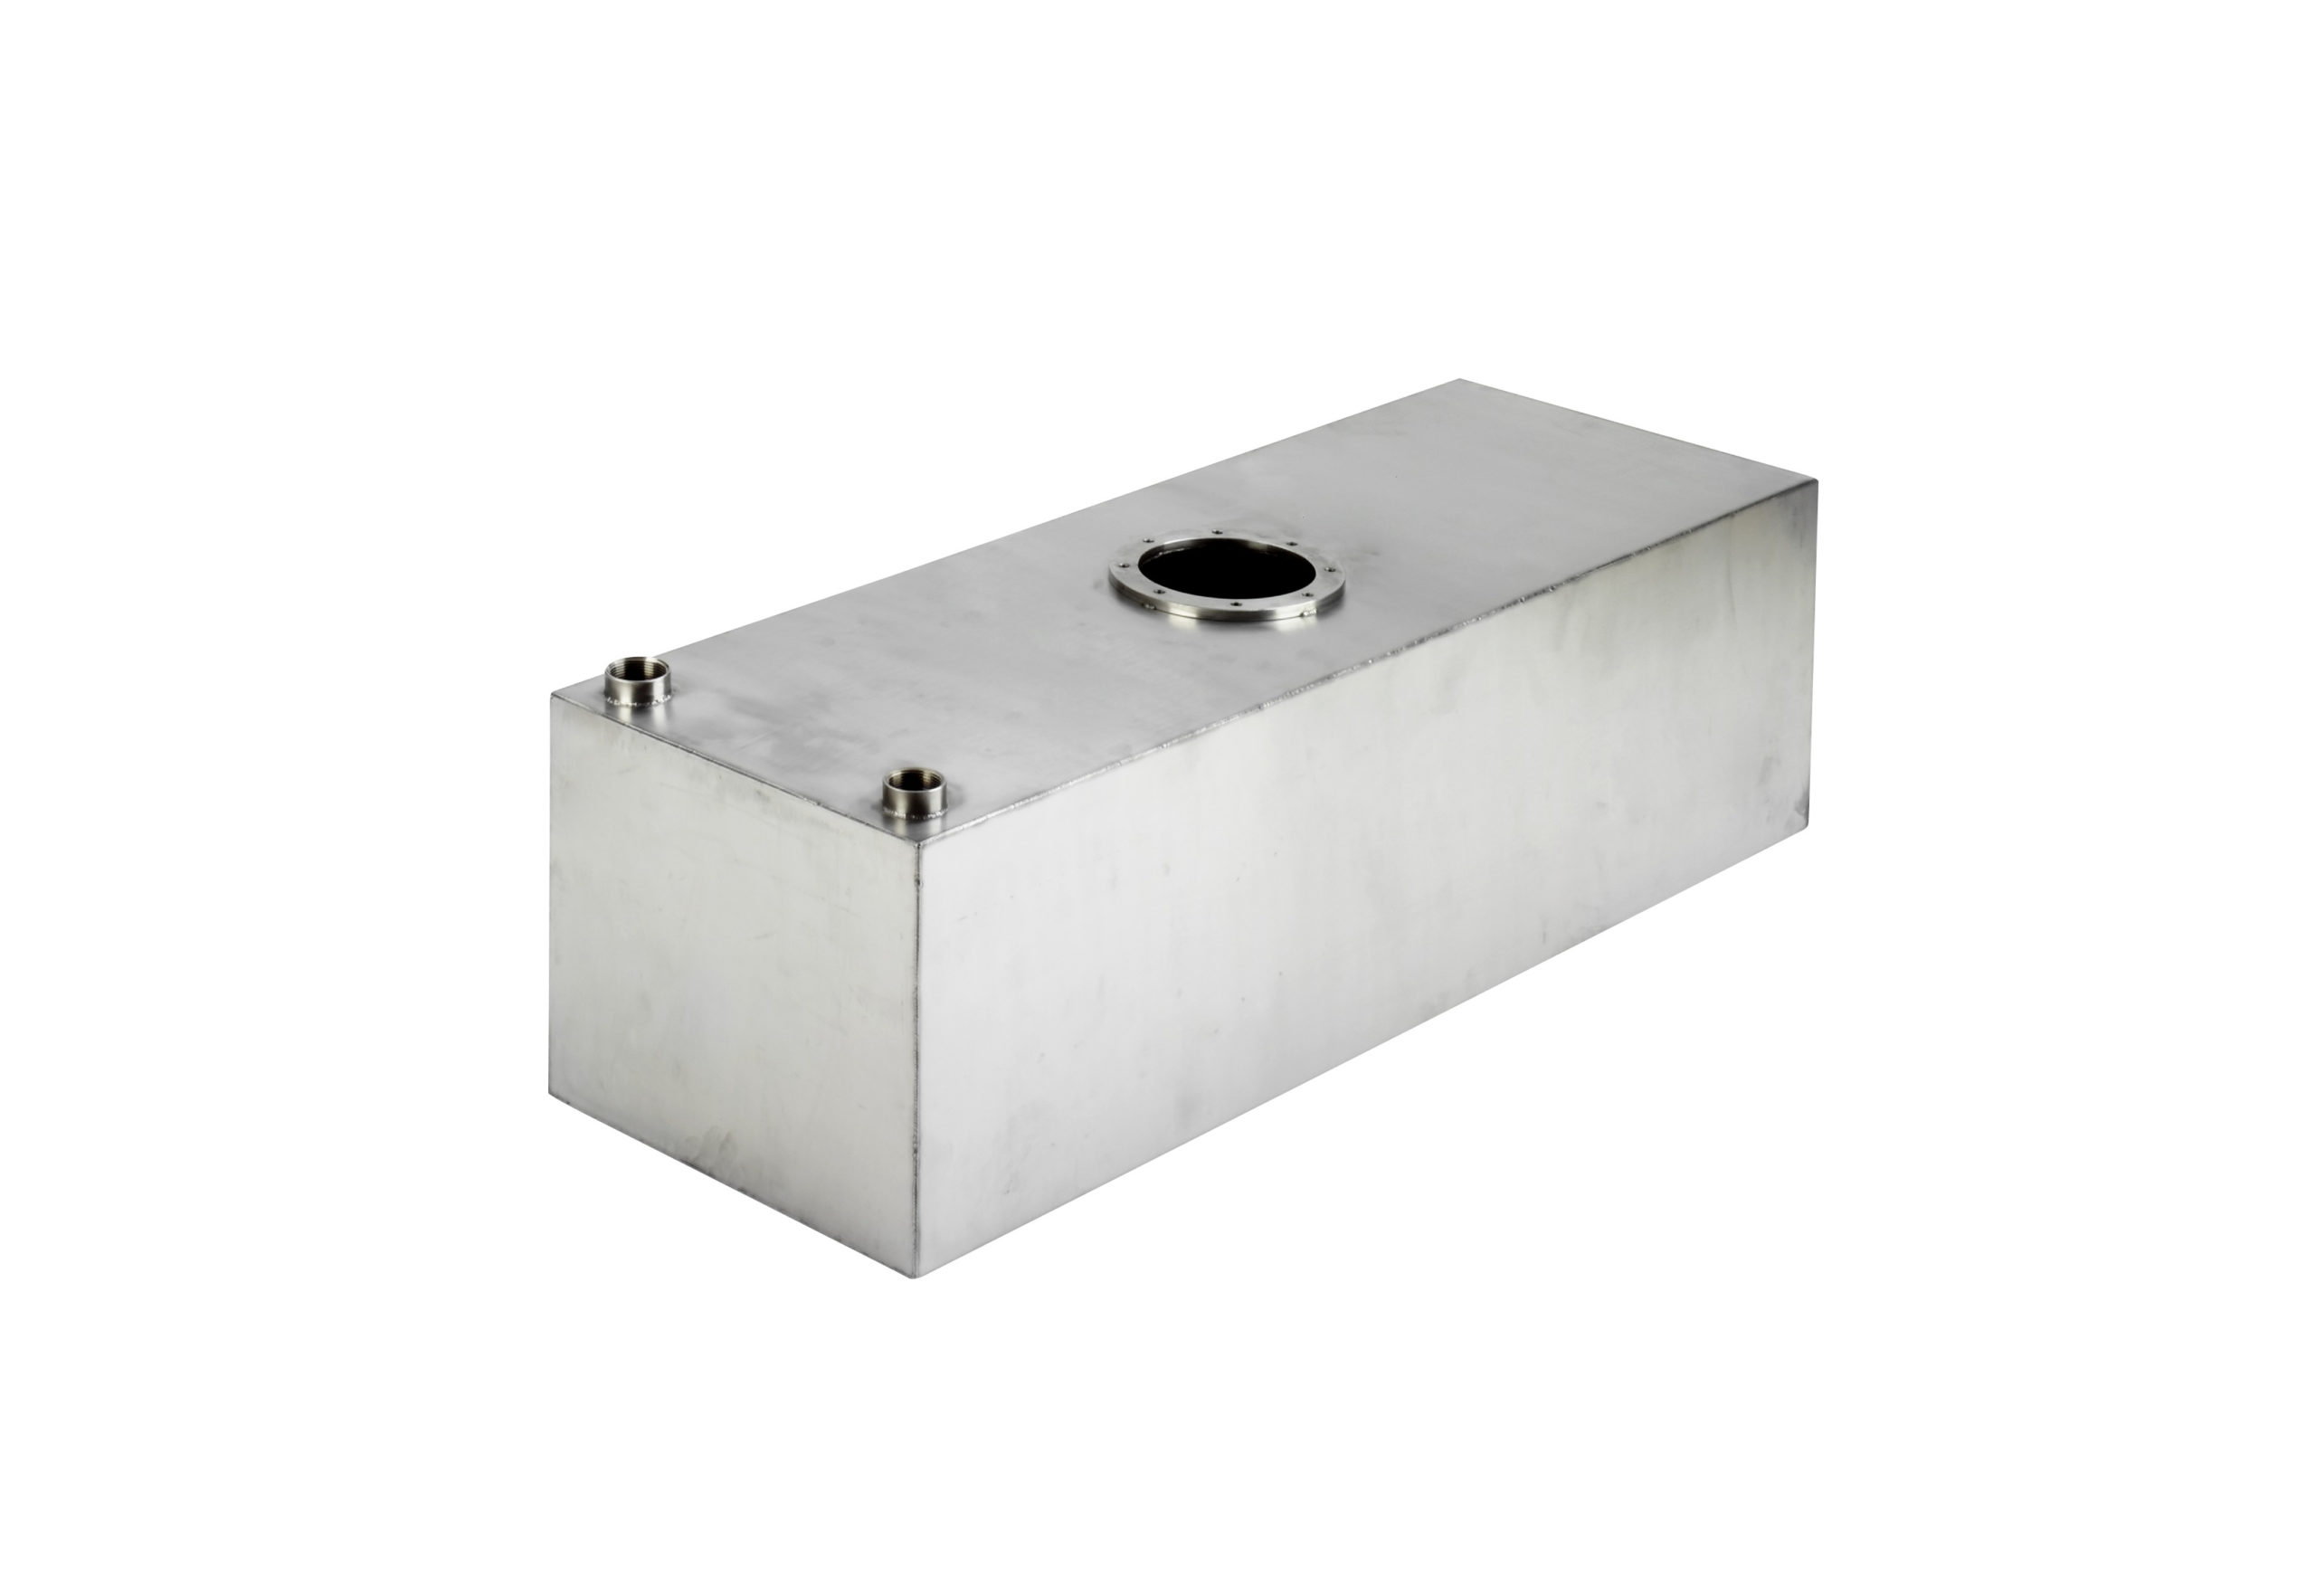 150 Litre Fuel Tank - Stainless Steel or Aluminium